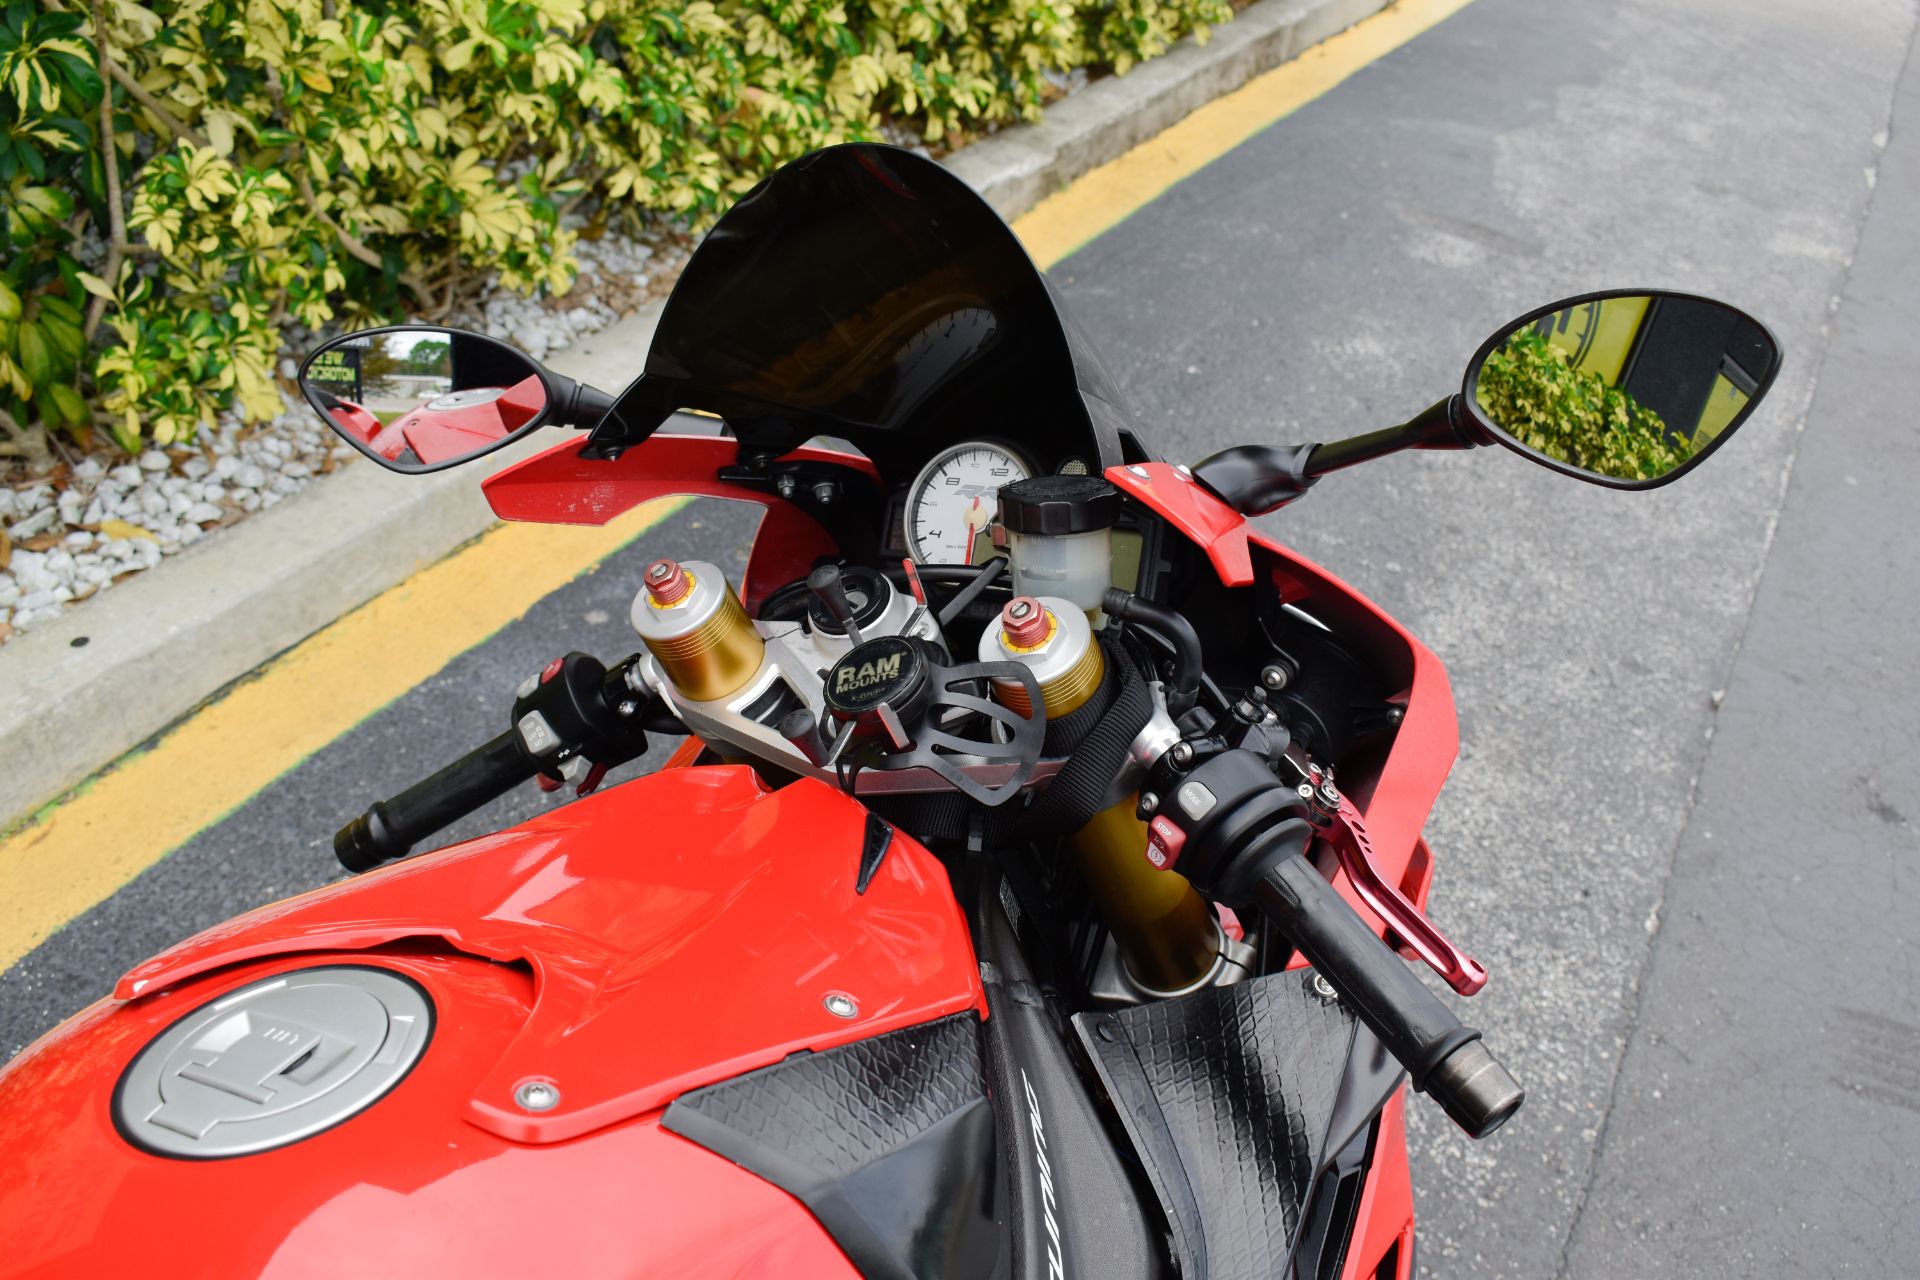 2013 BMW S 1000 RR in Jacksonville, Florida - Photo 10